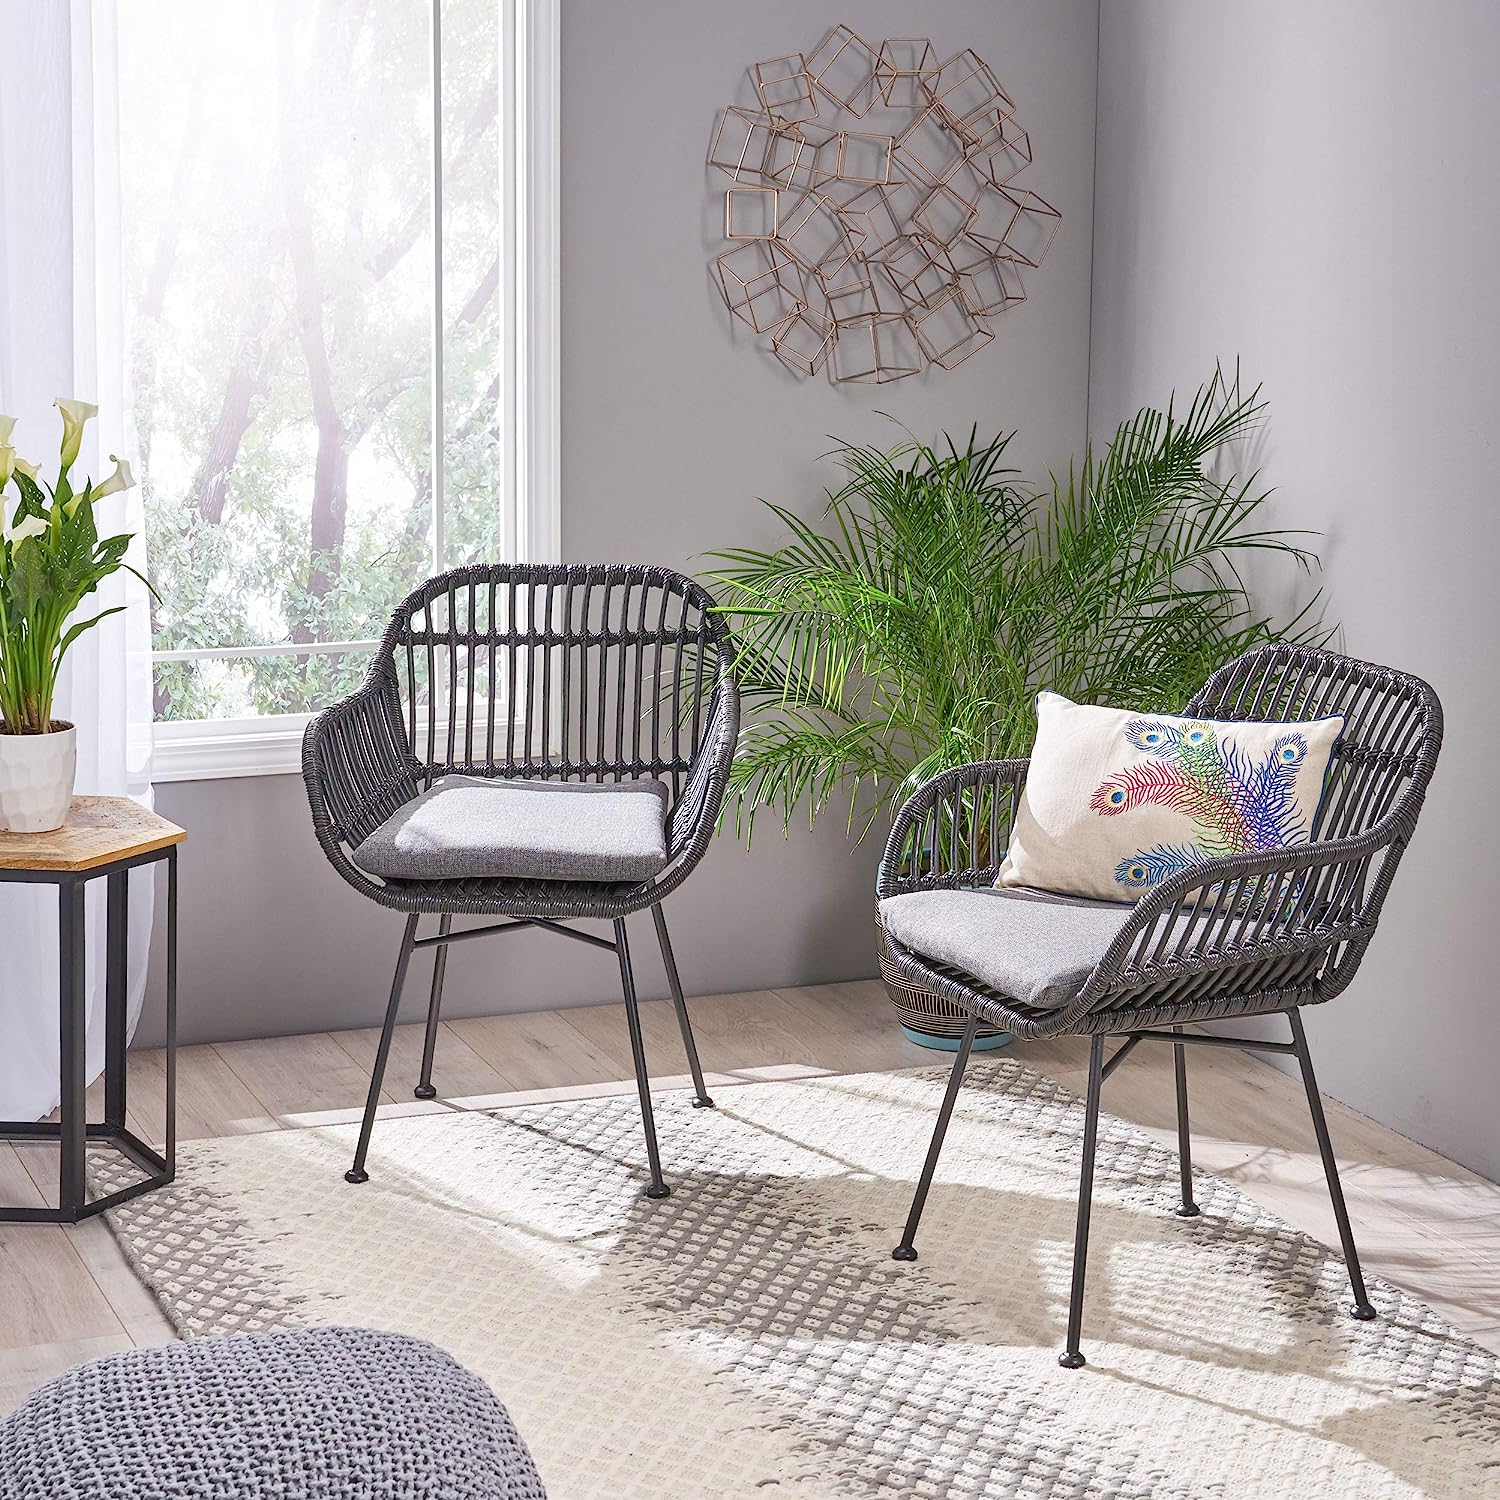 Discover Coastal Chic: Transform Your Space with Rattan Chairs and Cushions